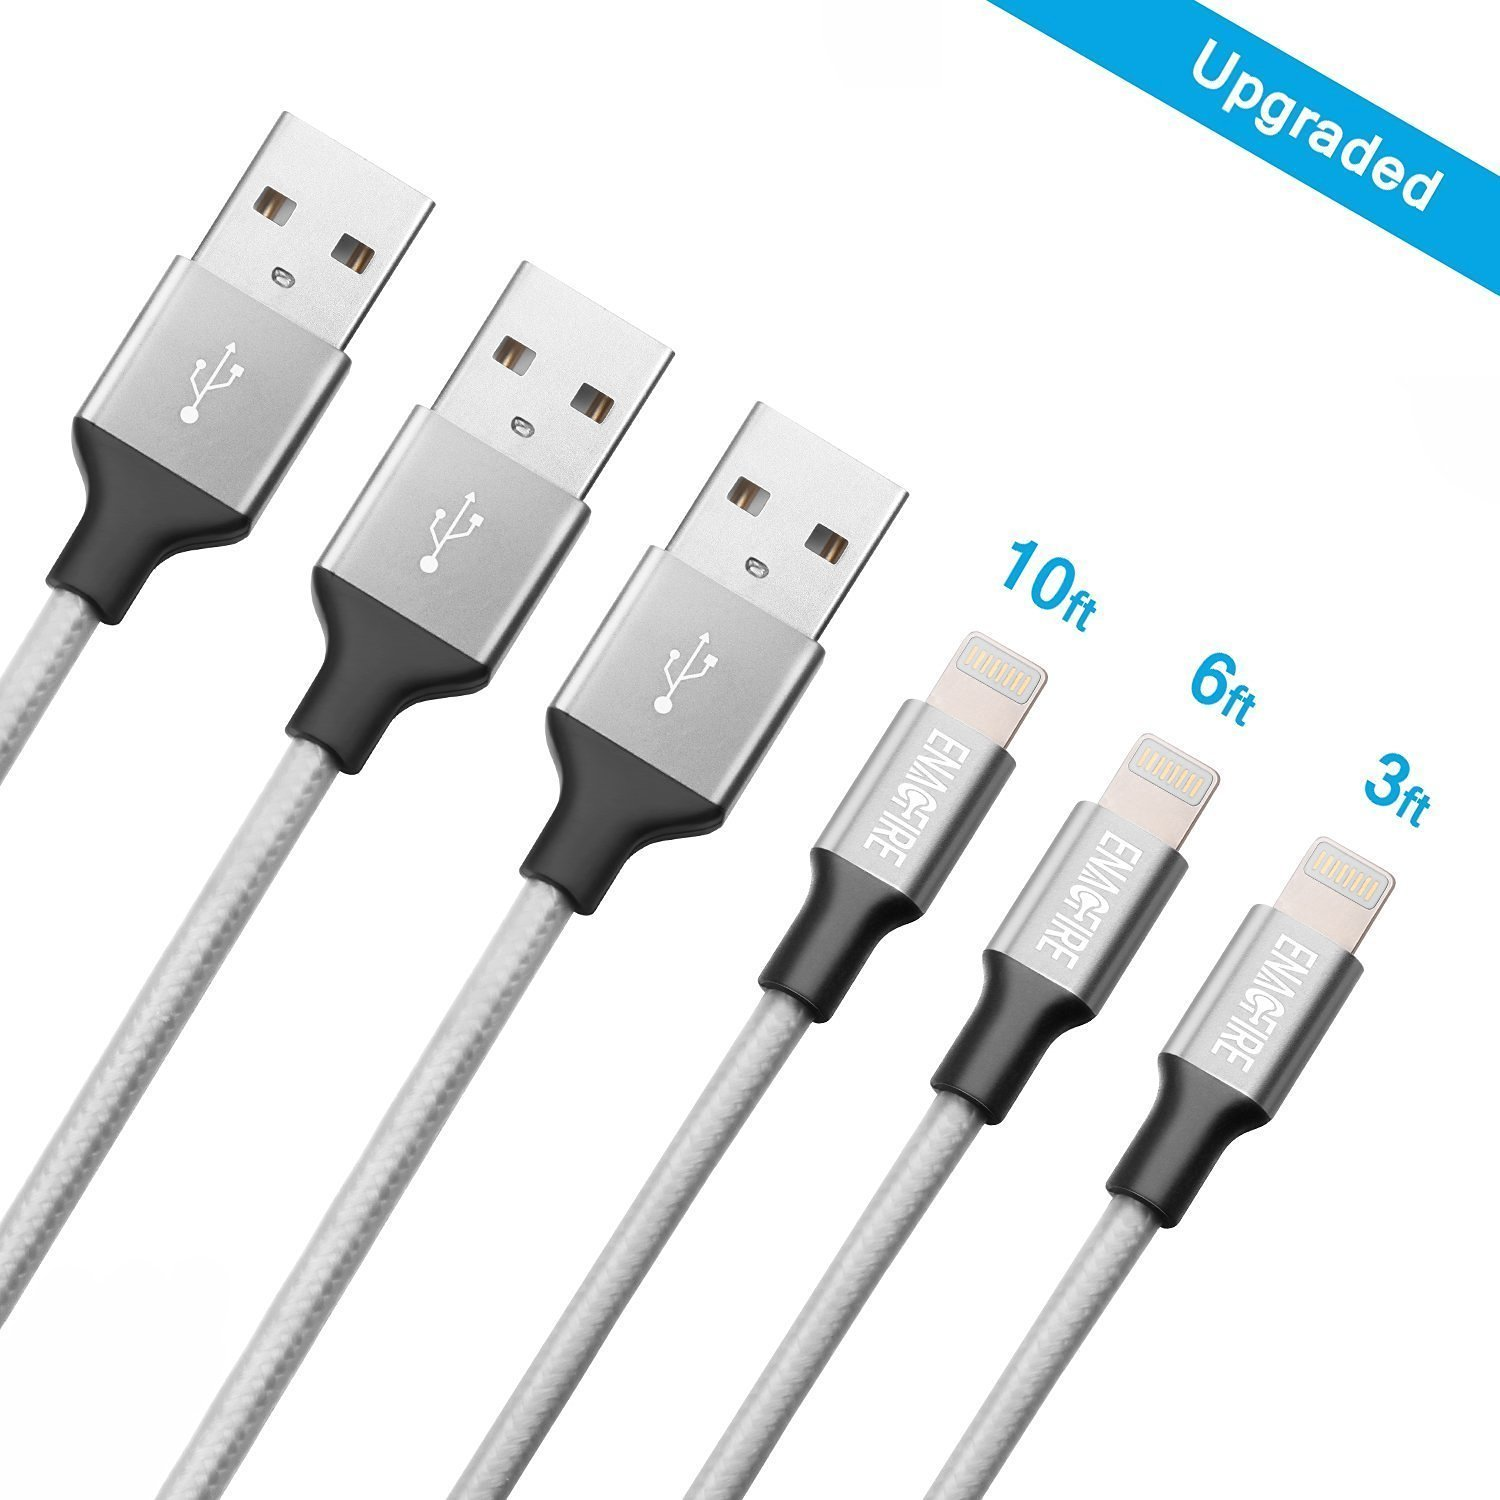 EnacFire Lightning Cables 3 Pack Only $9.99 on Amazon! (Compatible with Apple Devices!)